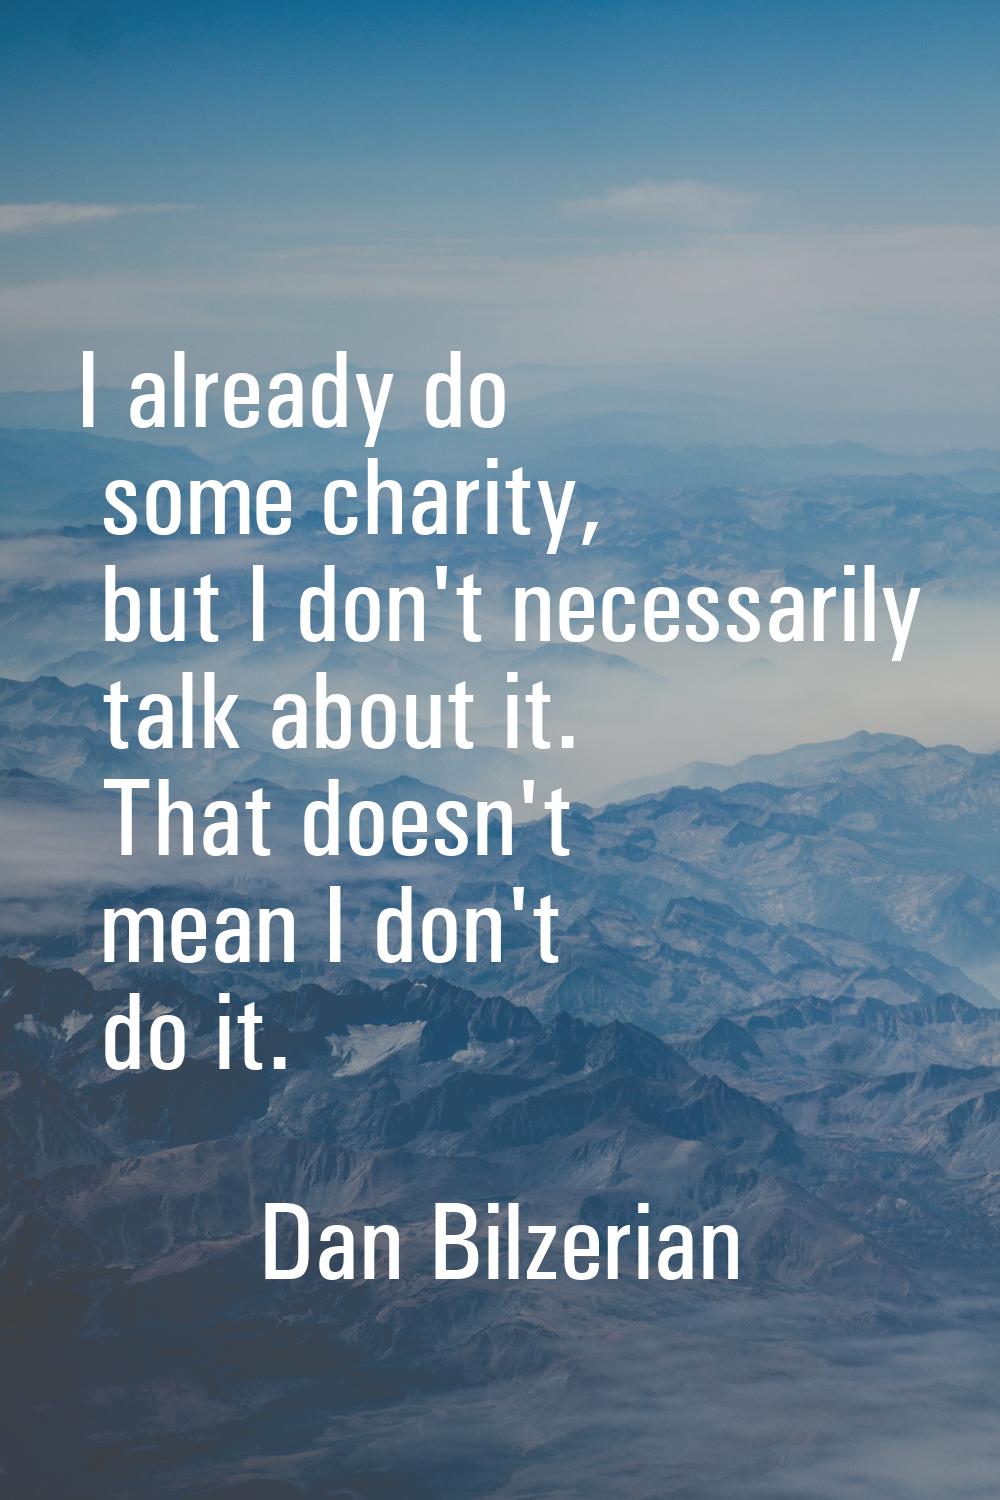 I already do some charity, but I don't necessarily talk about it. That doesn't mean I don't do it.